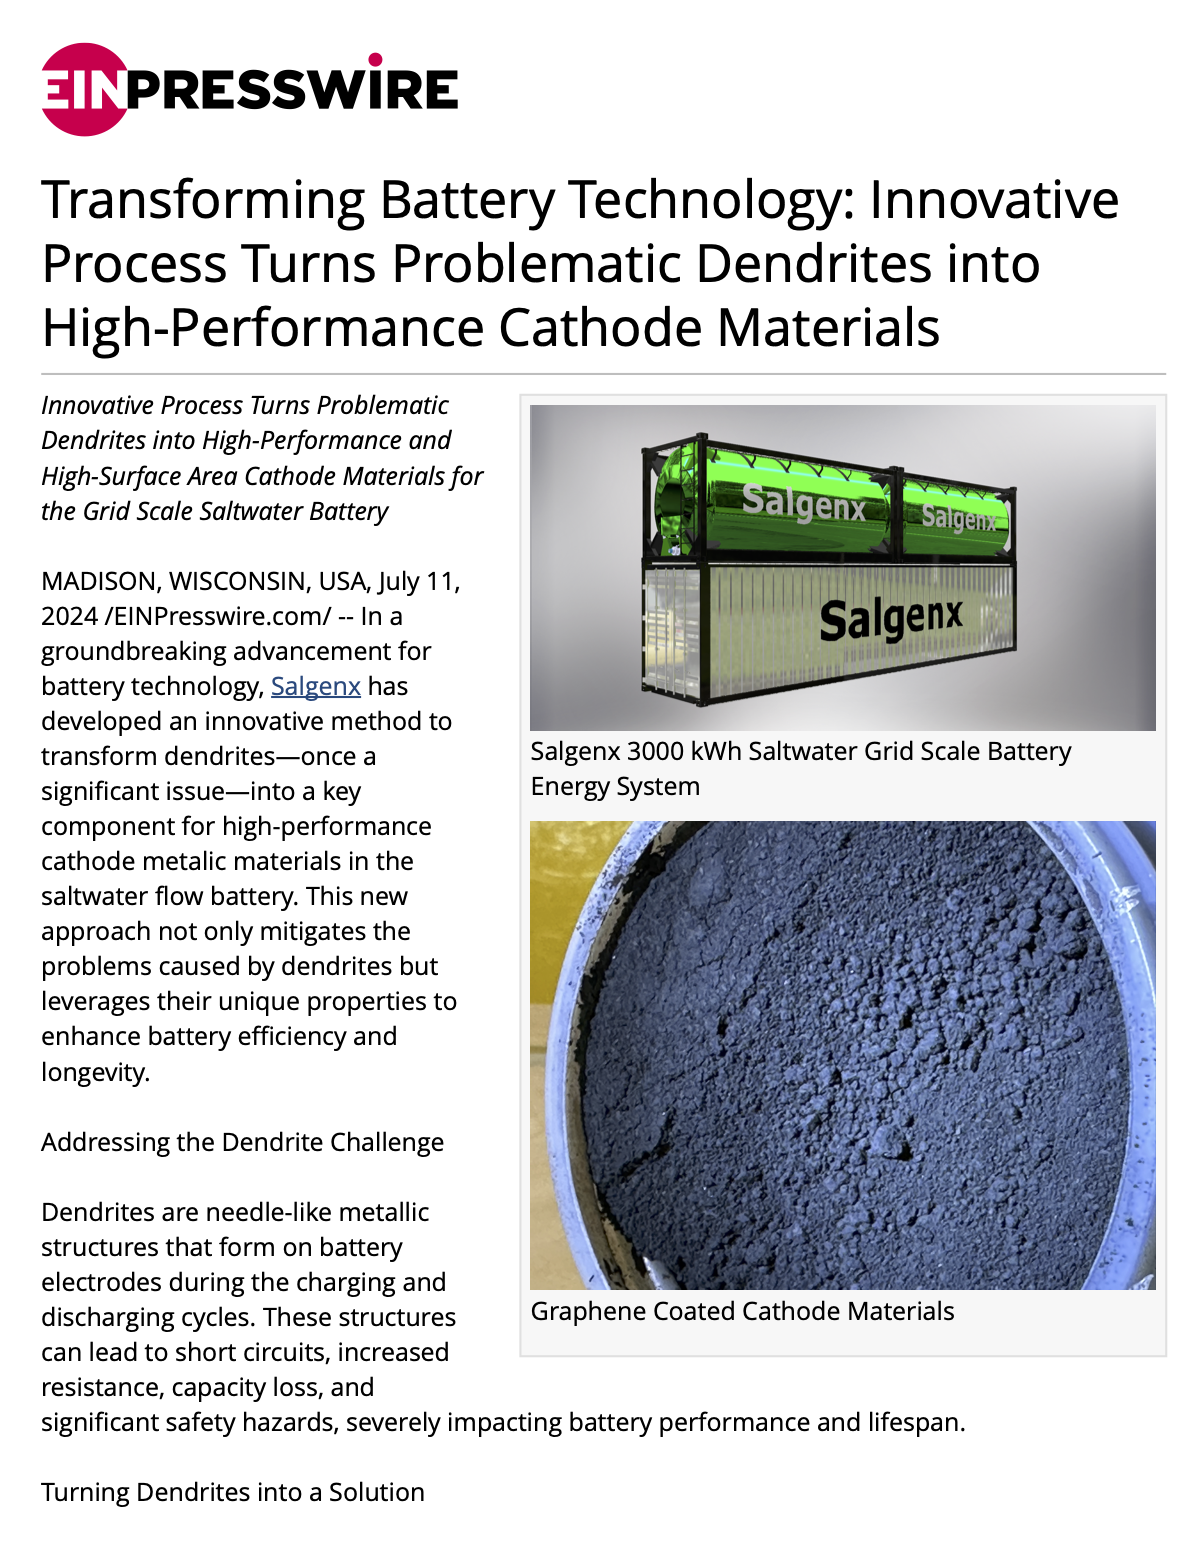 Transforming Battery Technology: Innovative Process Turns Problematic Dendrites into High-Performance Cathode Materials